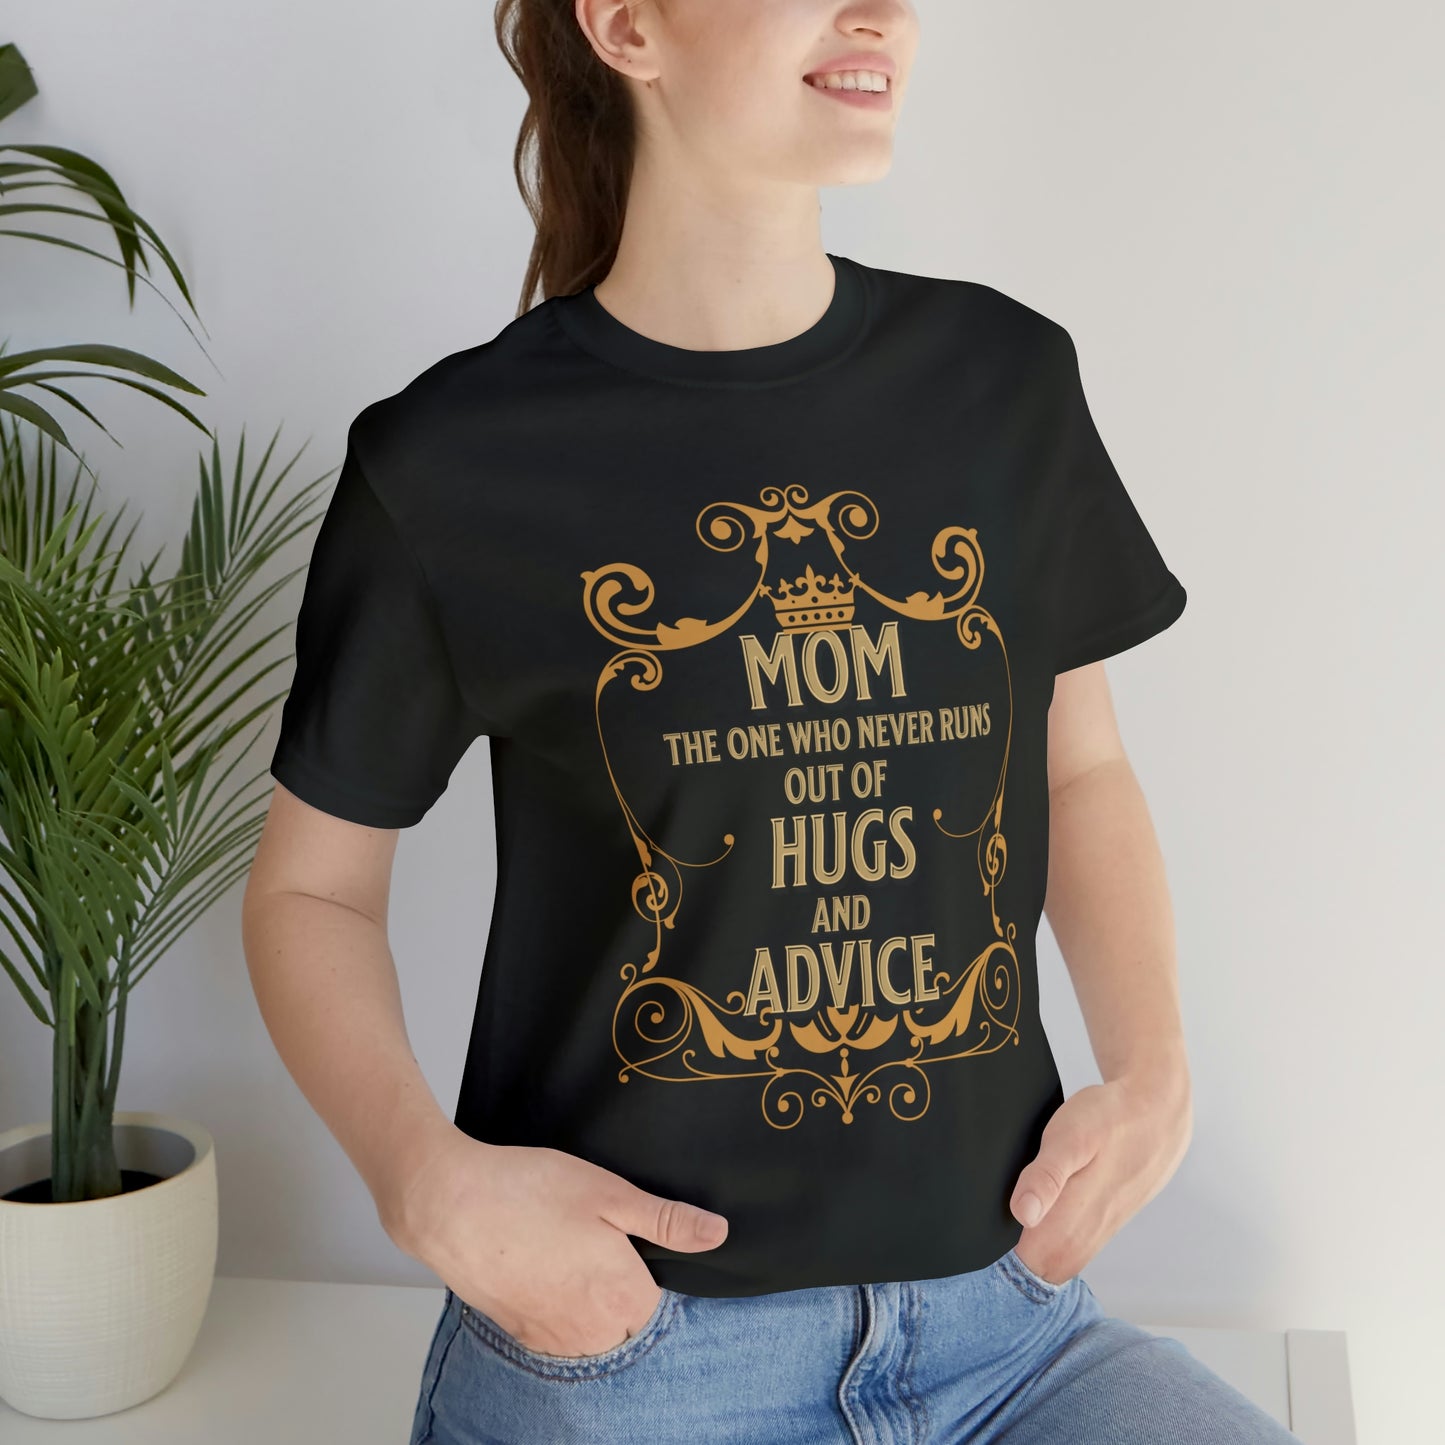 Women's Softstyle Tee, Mom the One Who Never Runs Out of Hugs and Advice, Gift for Mom